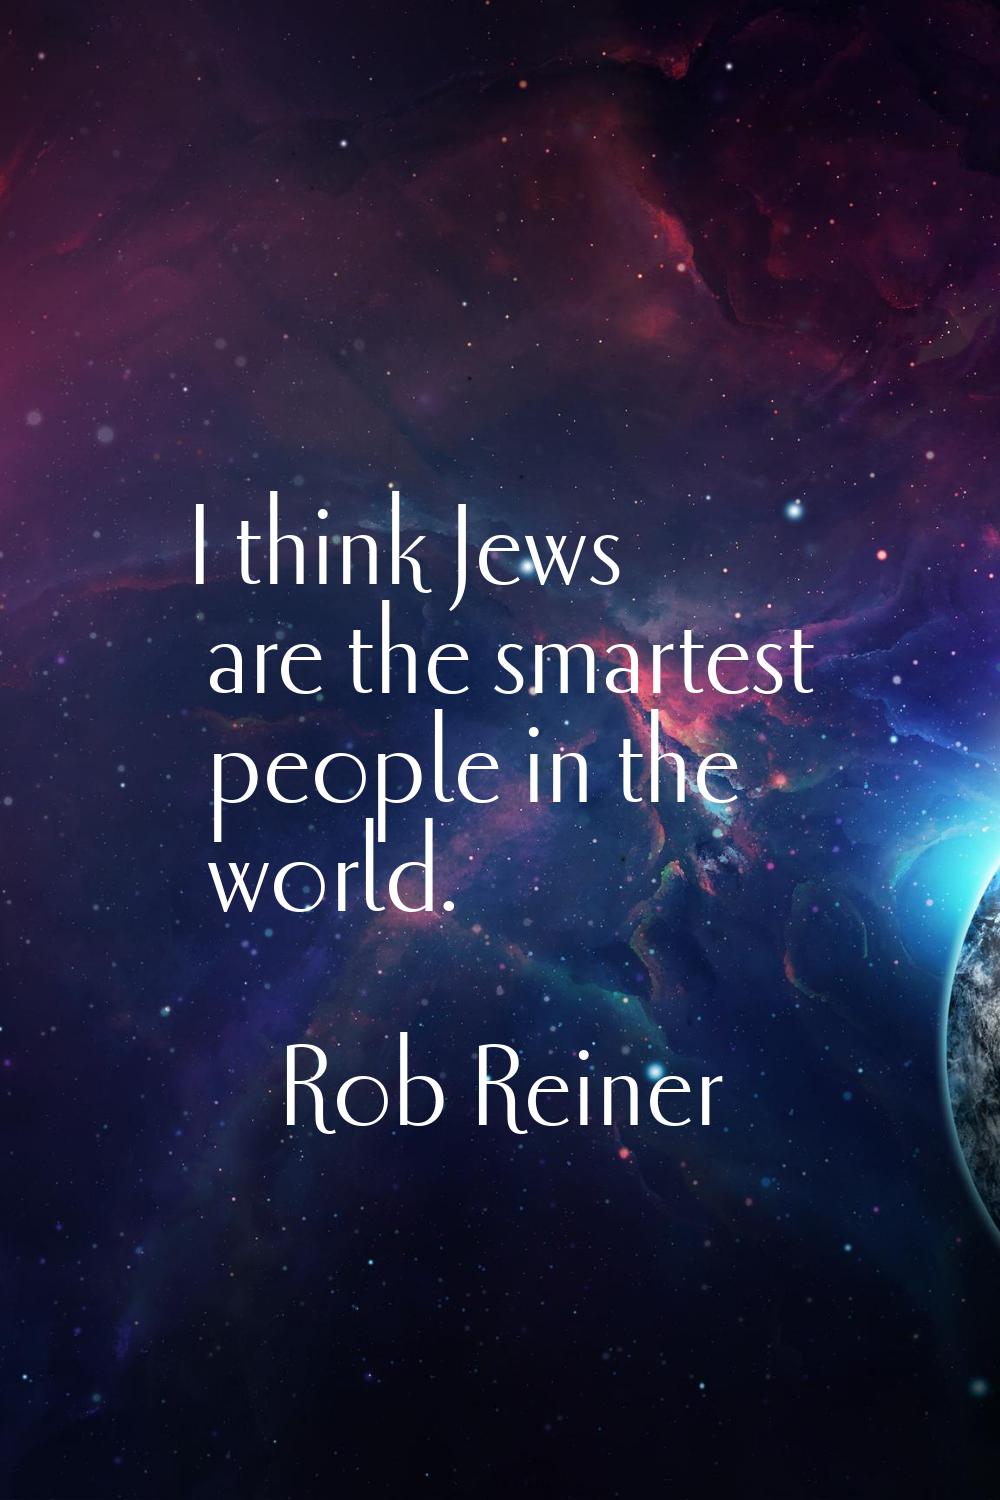 I think Jews are the smartest people in the world.